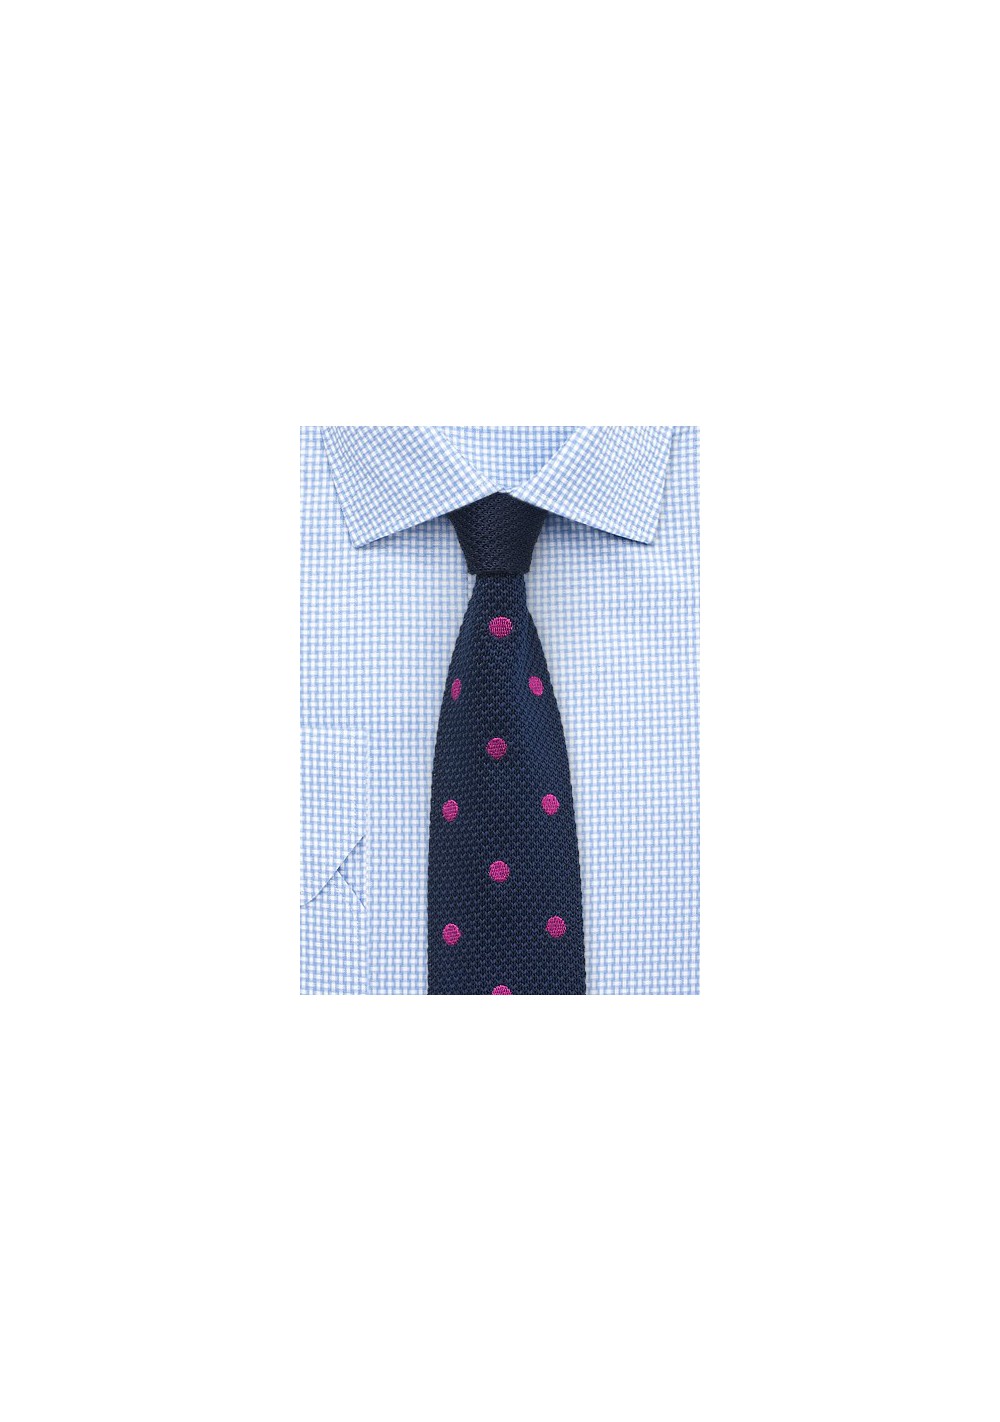 Blue Knit Tie with Pink Polka Dots